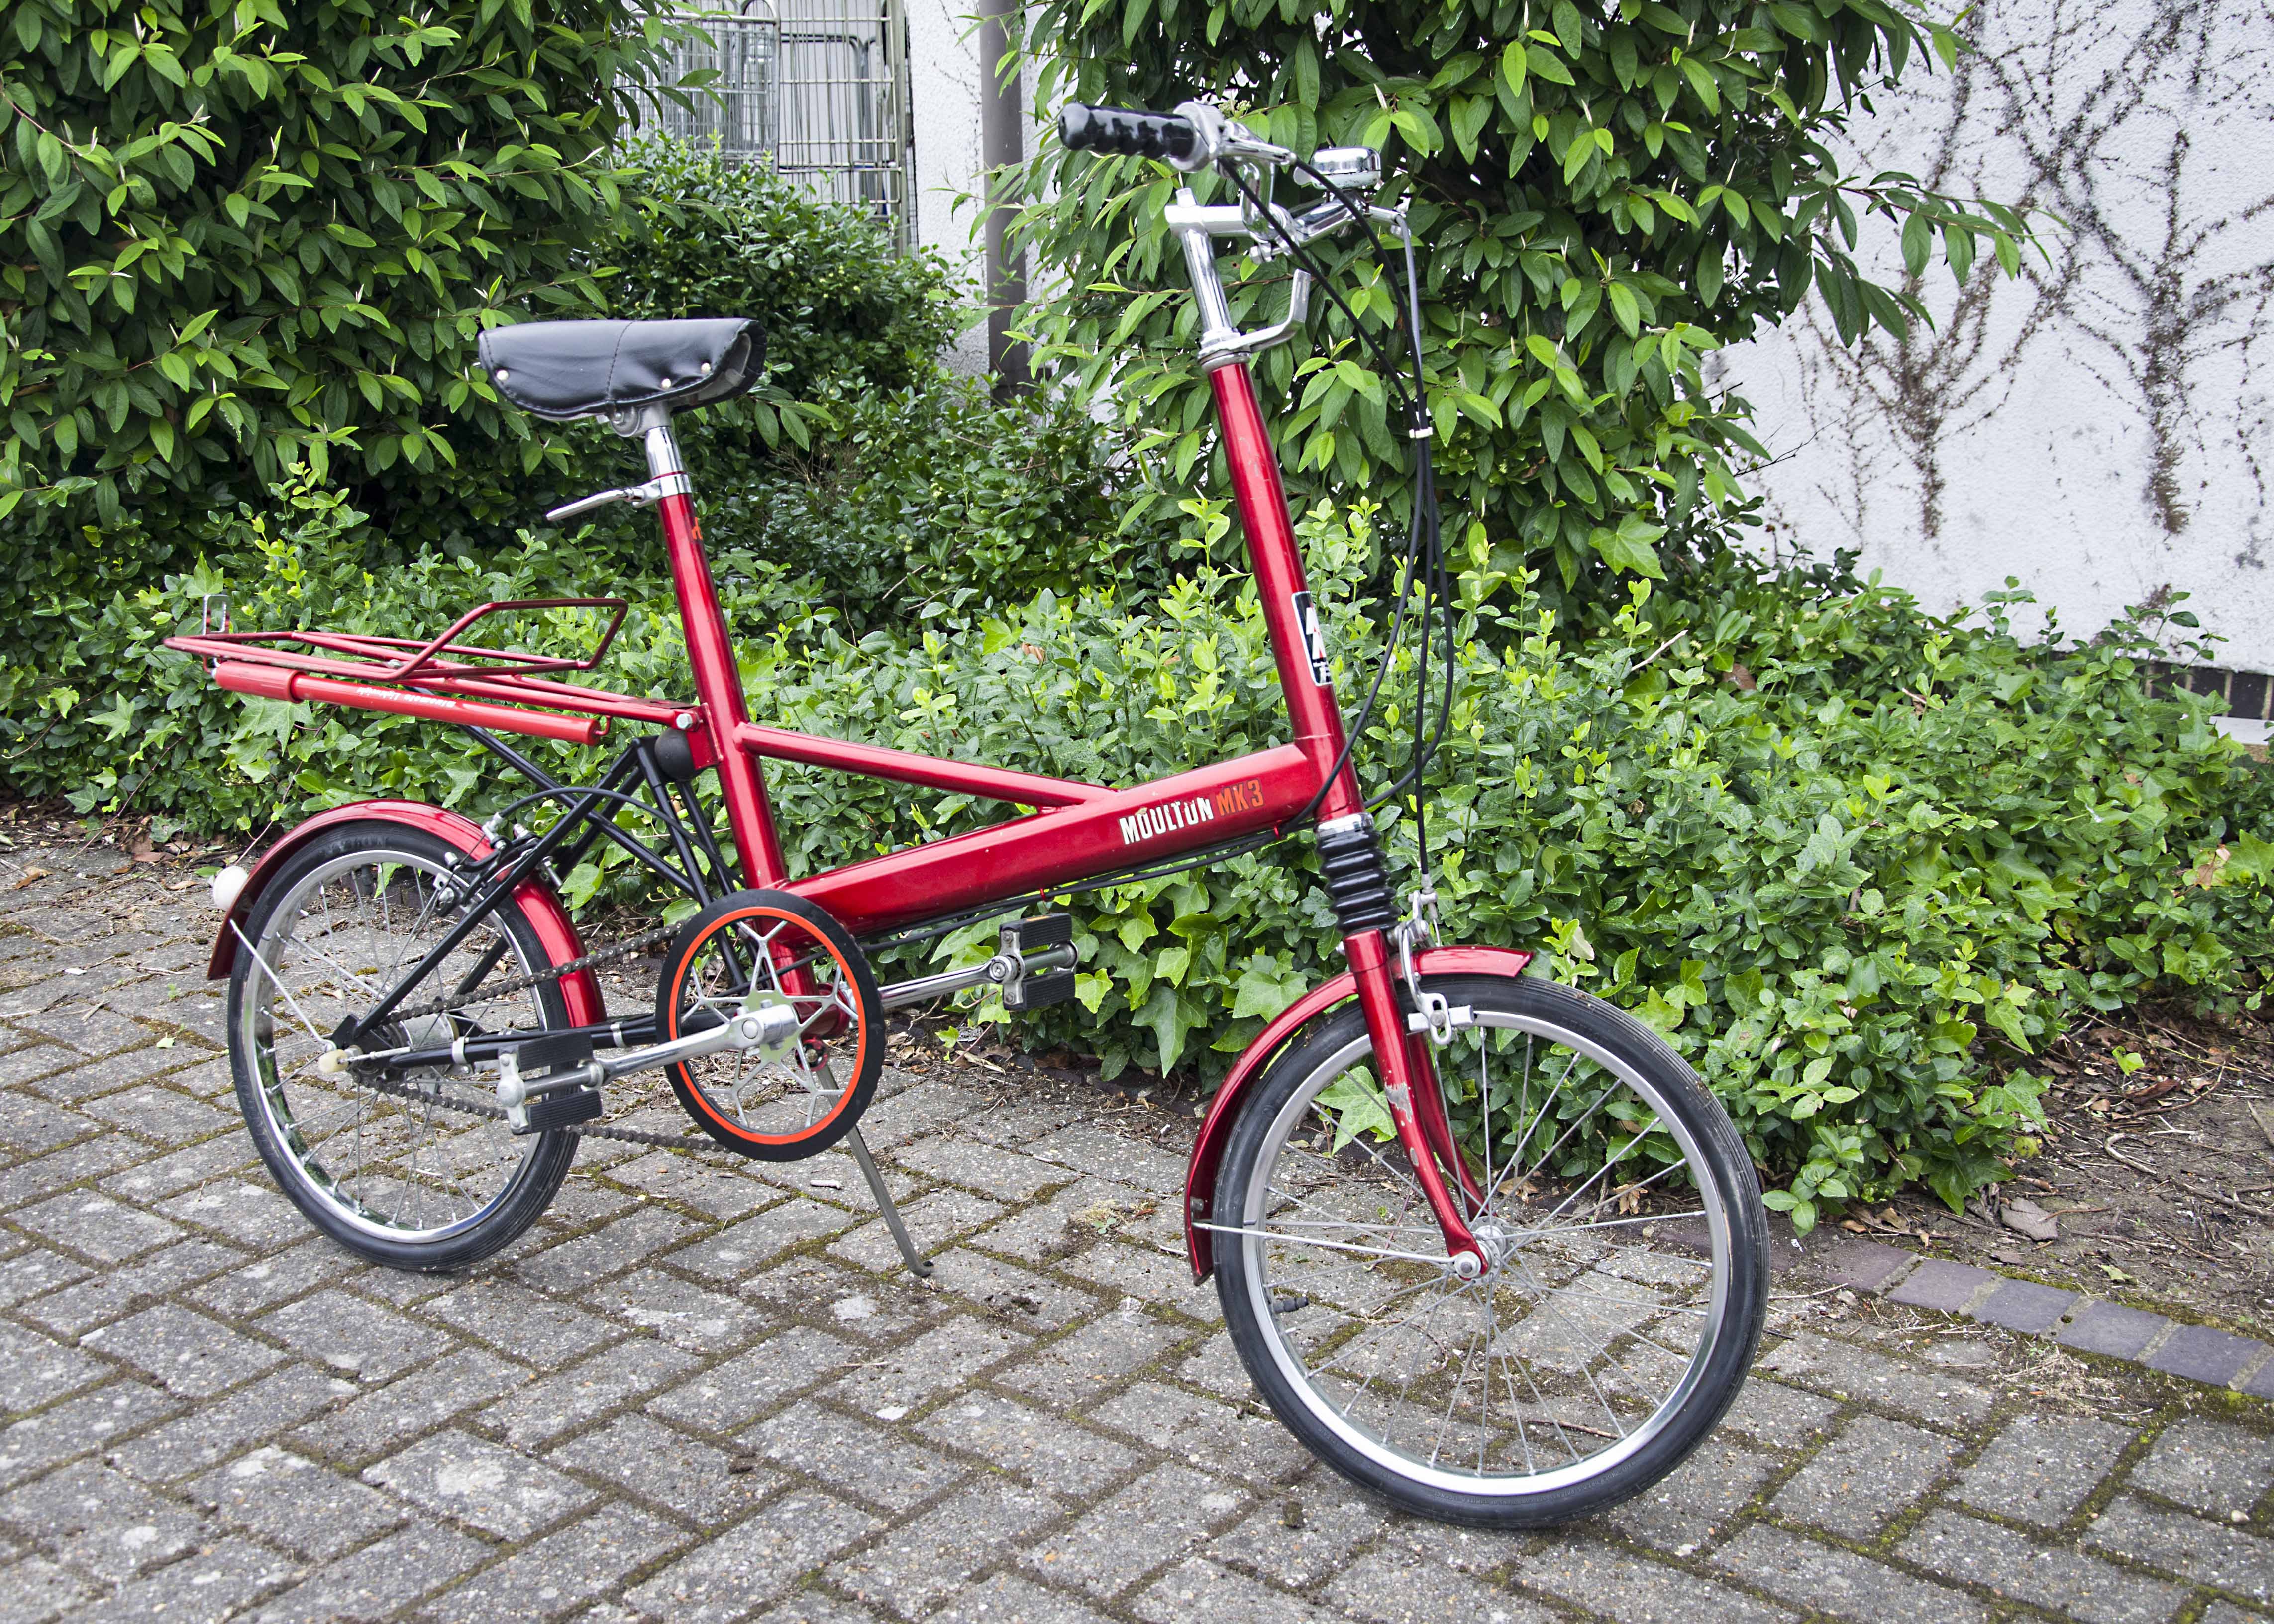 An early 1970s Moulton Mark 3 bicycle, in red, in very good working order and condition, some